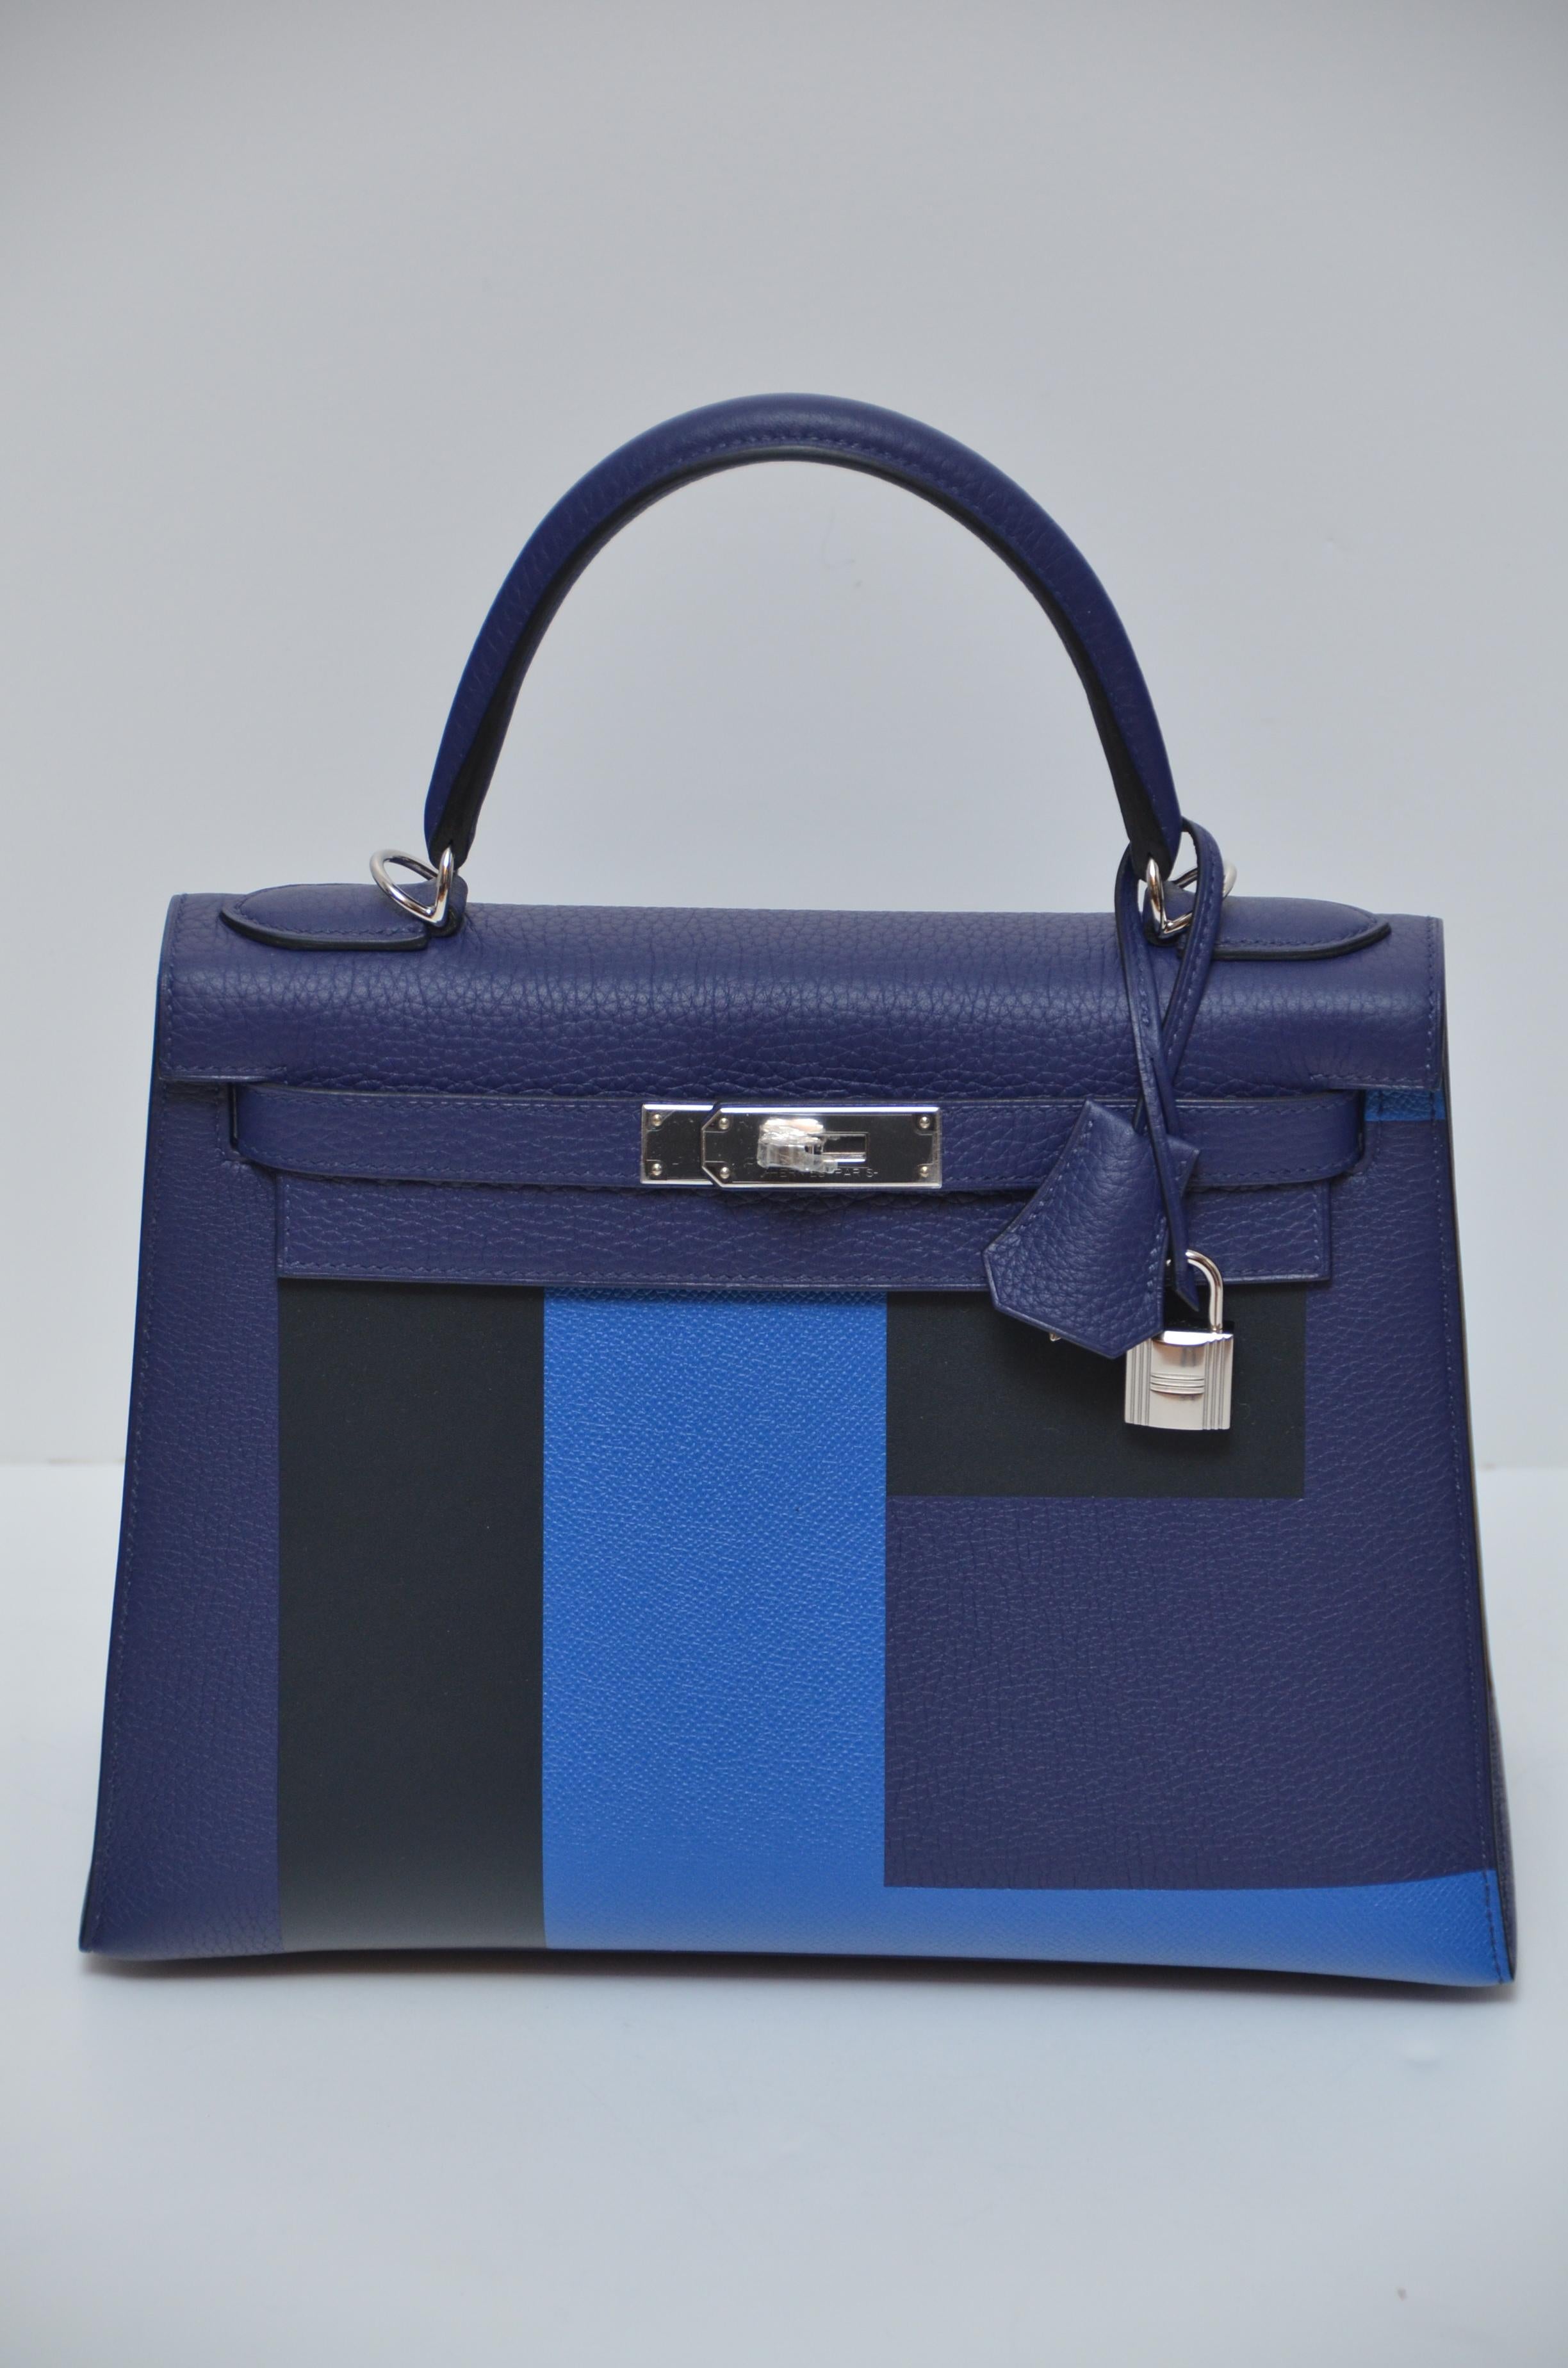 Hermes Kelly 28 CM limited edition.
3 different colors .
Clemence/Box/Epsom leather
Bleu Encre/Bleu Obscure/Bleu Zellege /Vert and Cypress interior.
Letter E ,stands for everything.
Brand new never used with full set .
Original receipt available to